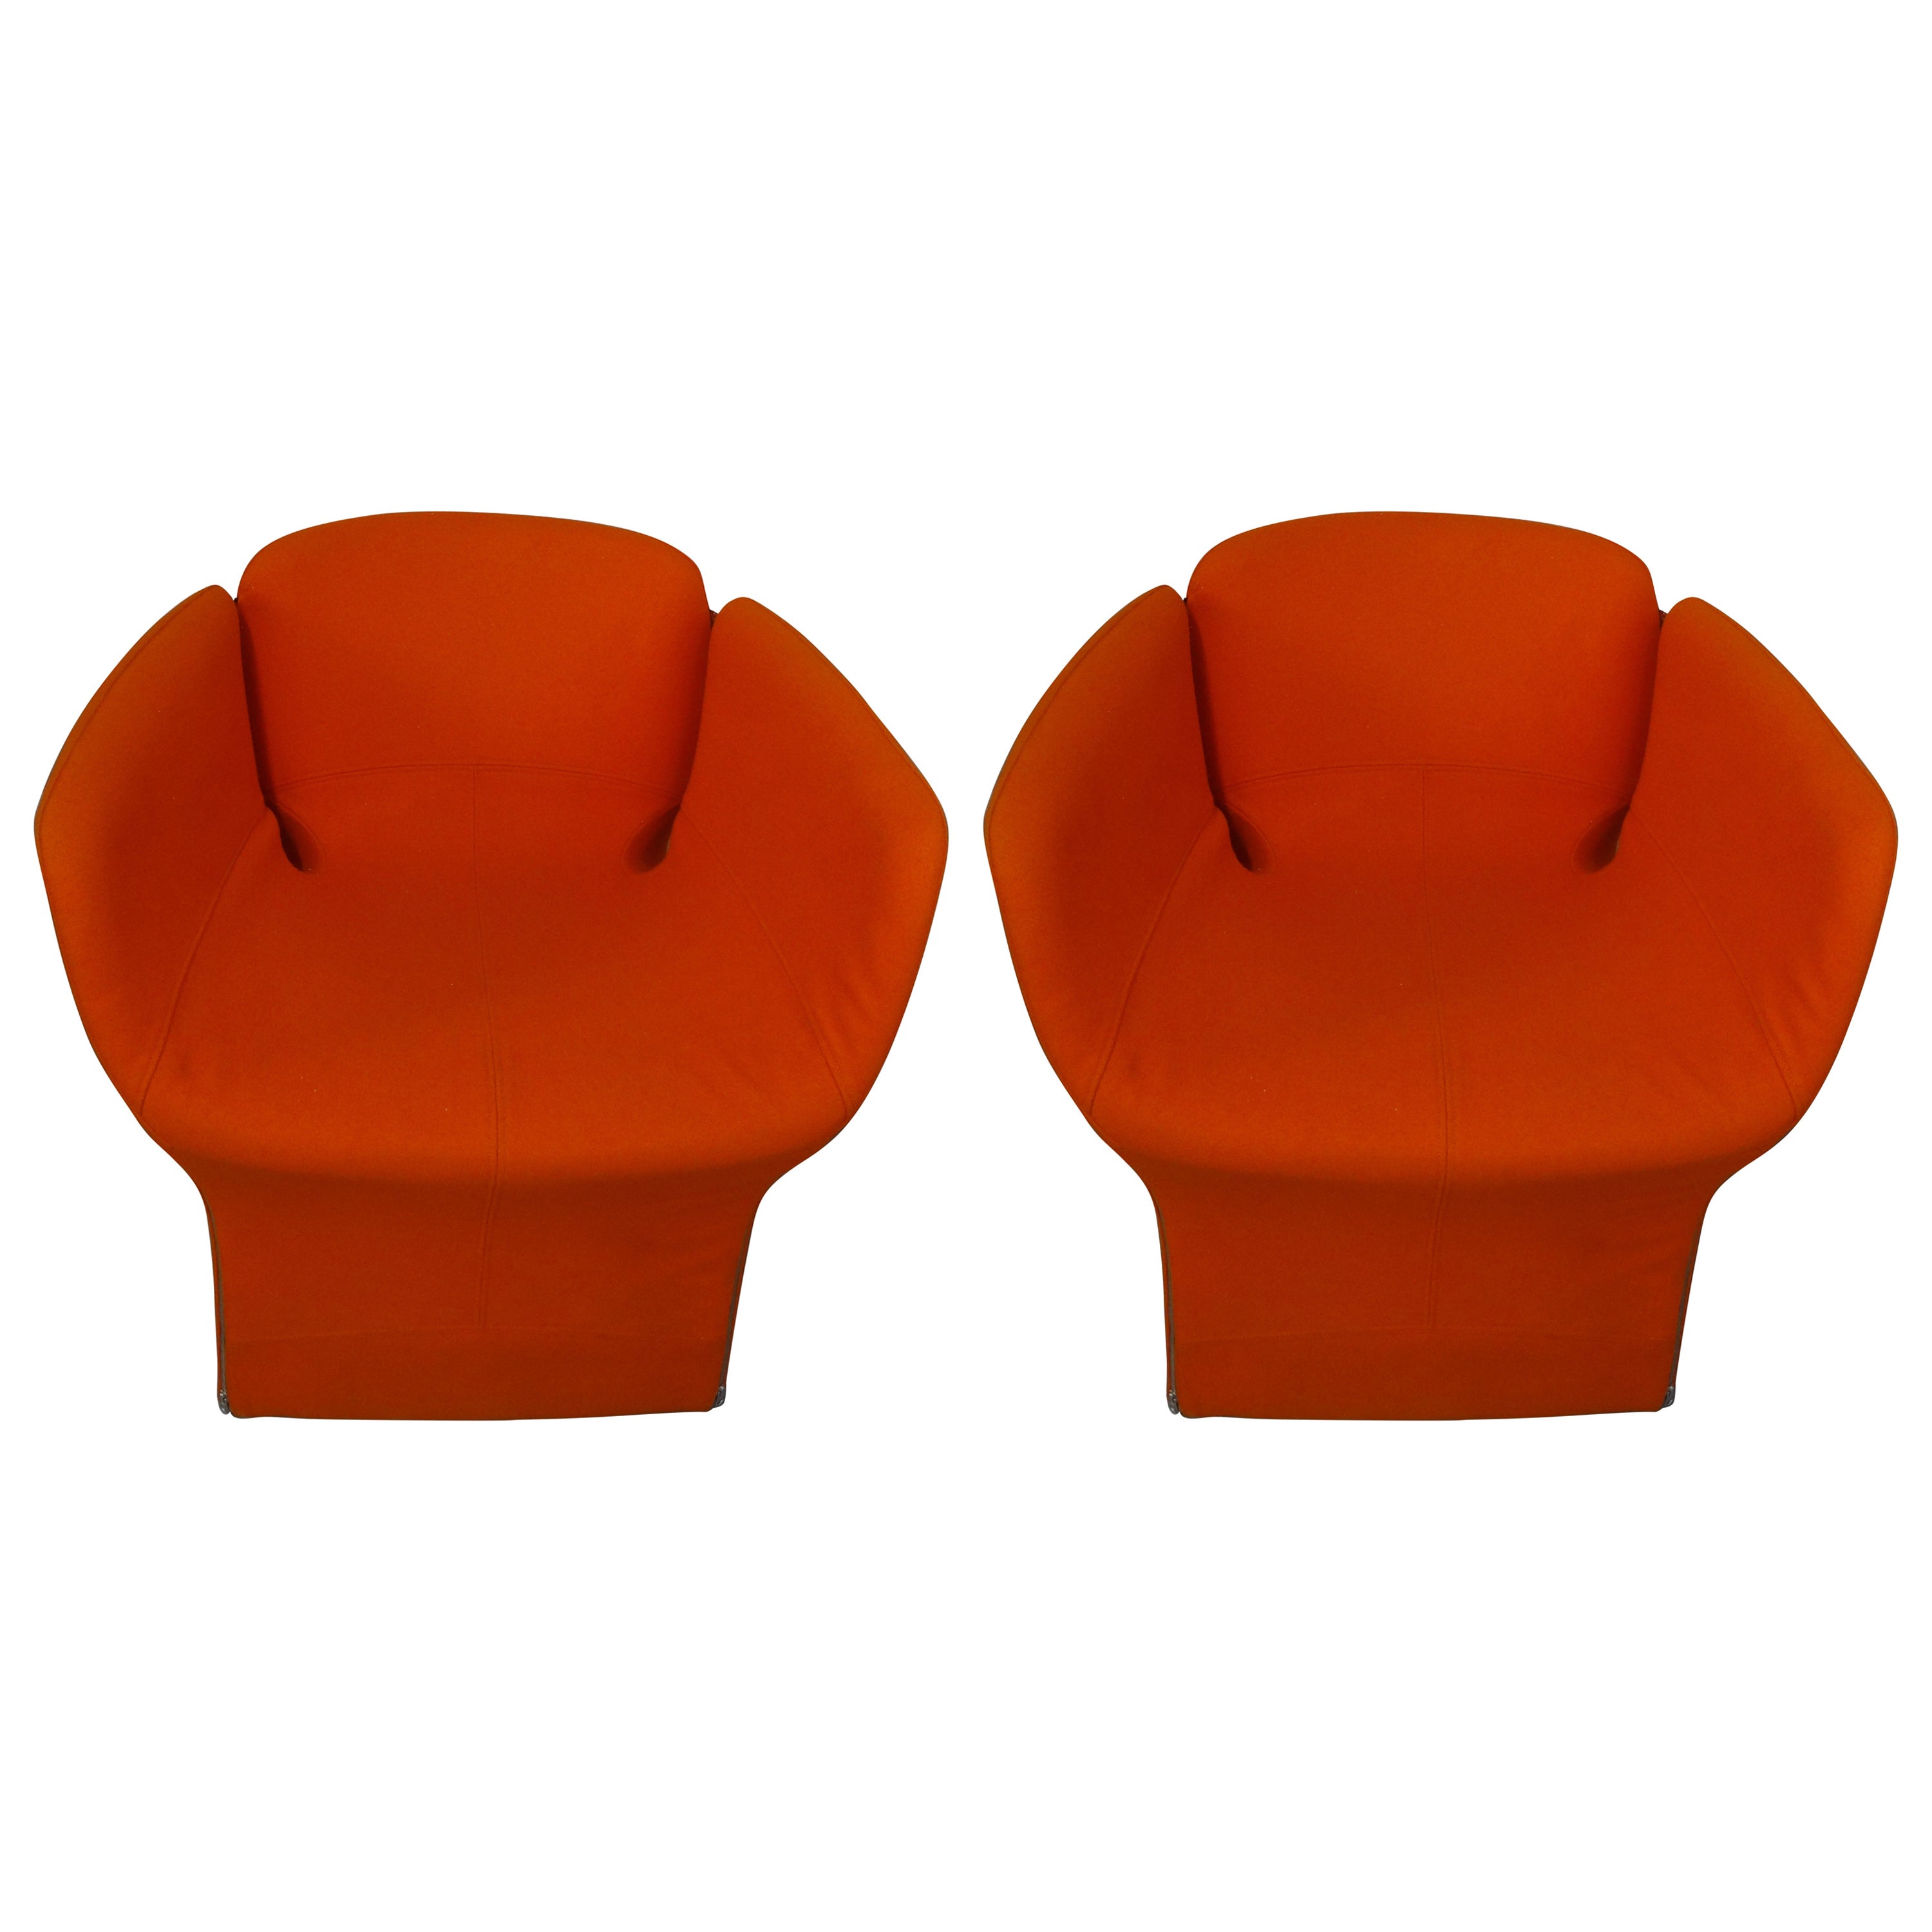 Pair Of Italian Modern Chairs By Ron Arad For Moroso For Sale